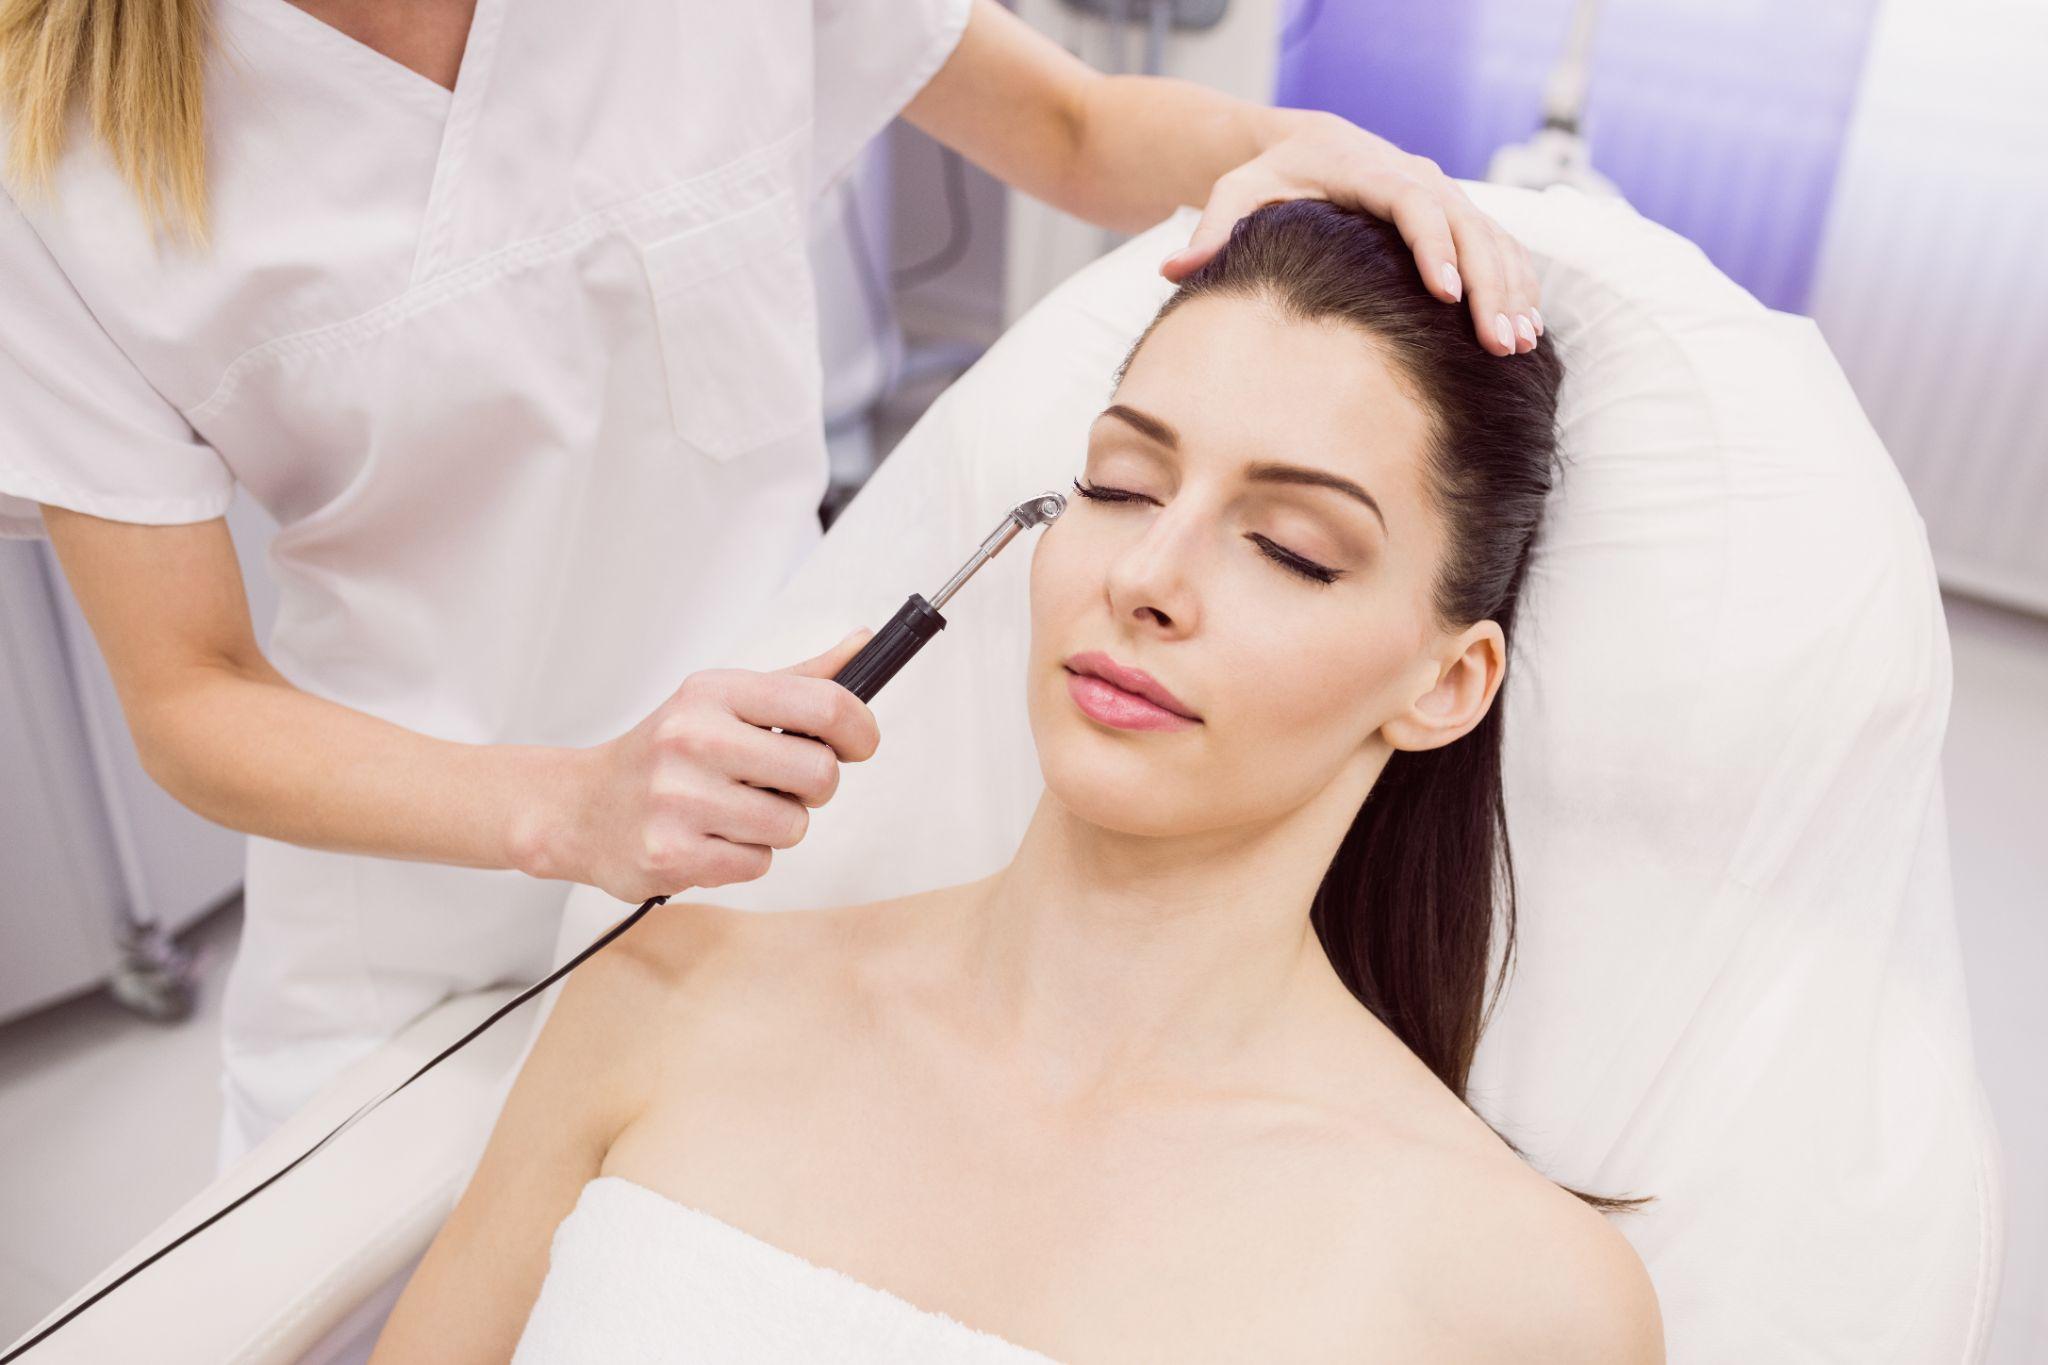 4 Reasons Laser Hair Removal Is a Good Investment